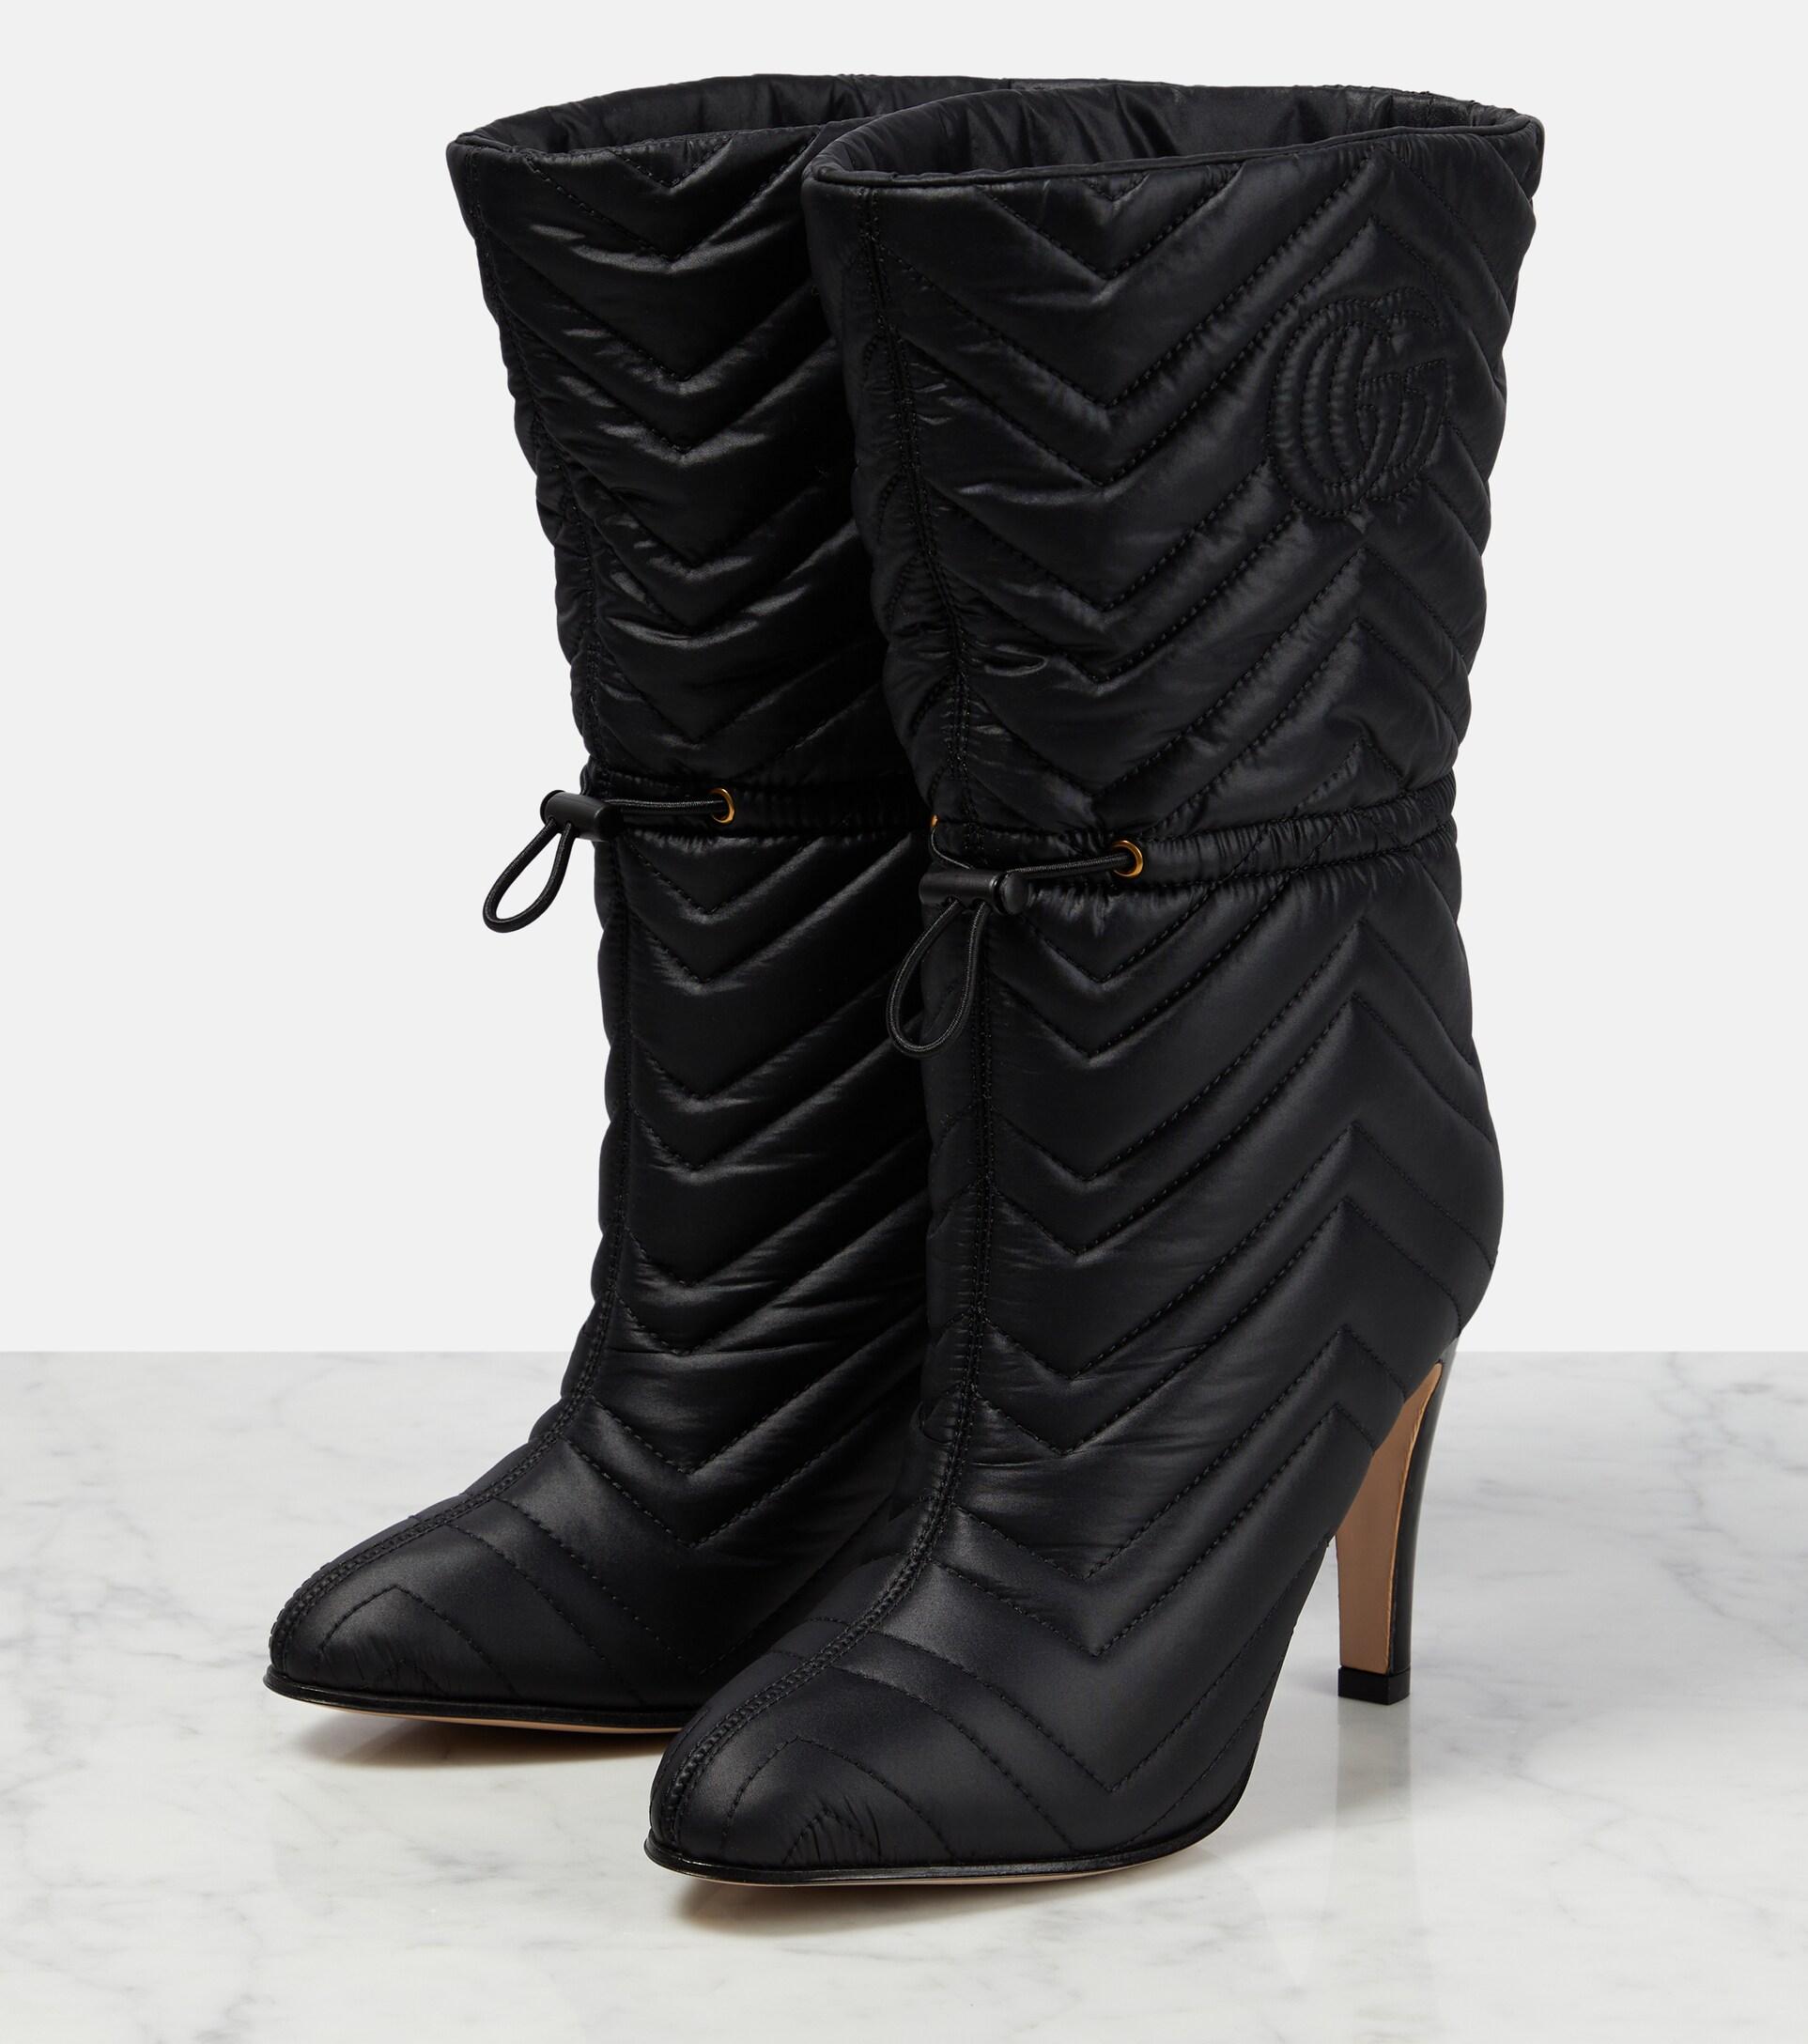 Gucci GG Matelasse Leather Boots in Black